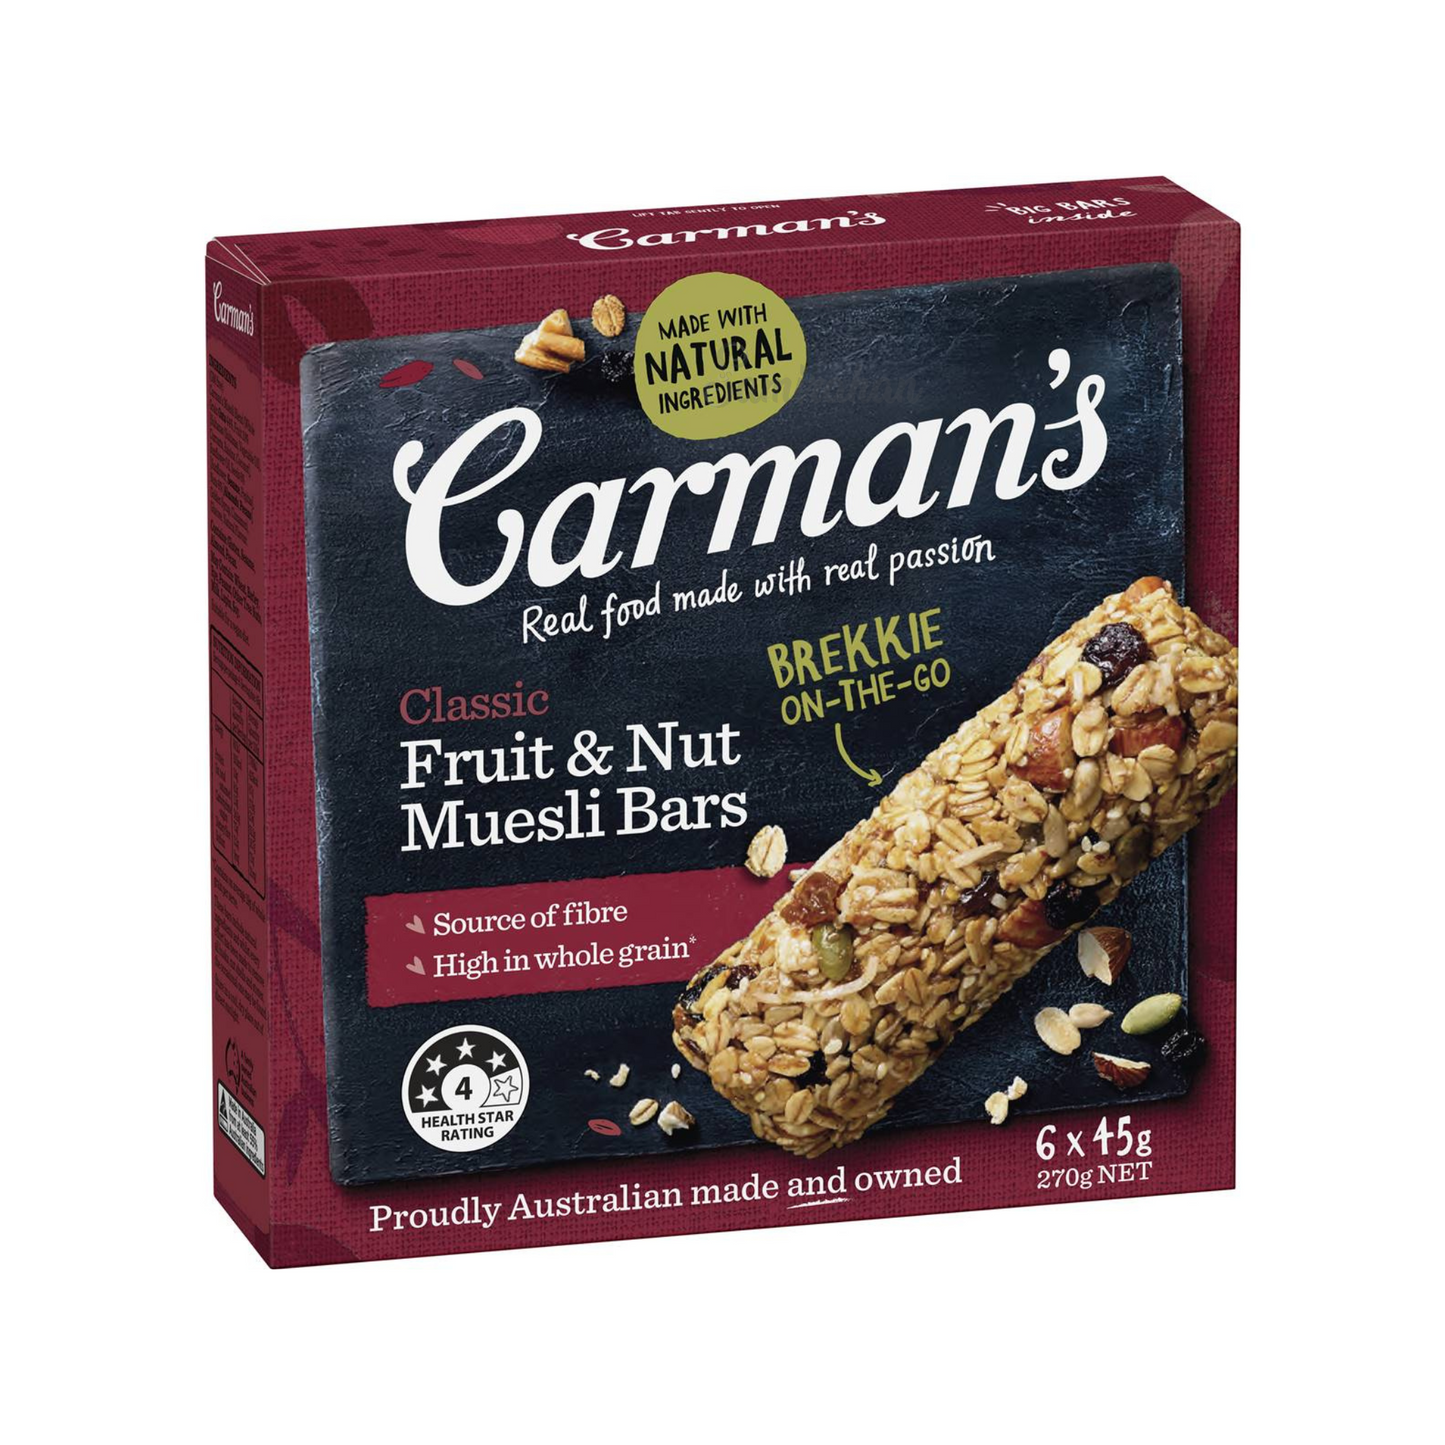 Carman's Classic Fruit & Nut Muesli Bars are made with natural ingredients, Aussie oats, sun-ripened vine fruits & roasted nuts. Source of fibre & high in whole grain. Australian Health Star Rating of 4. Halal certified. Vegan. Best genuine foreign imported Aussie health food healthy nutrition bar in Dhaka Bangladesh.